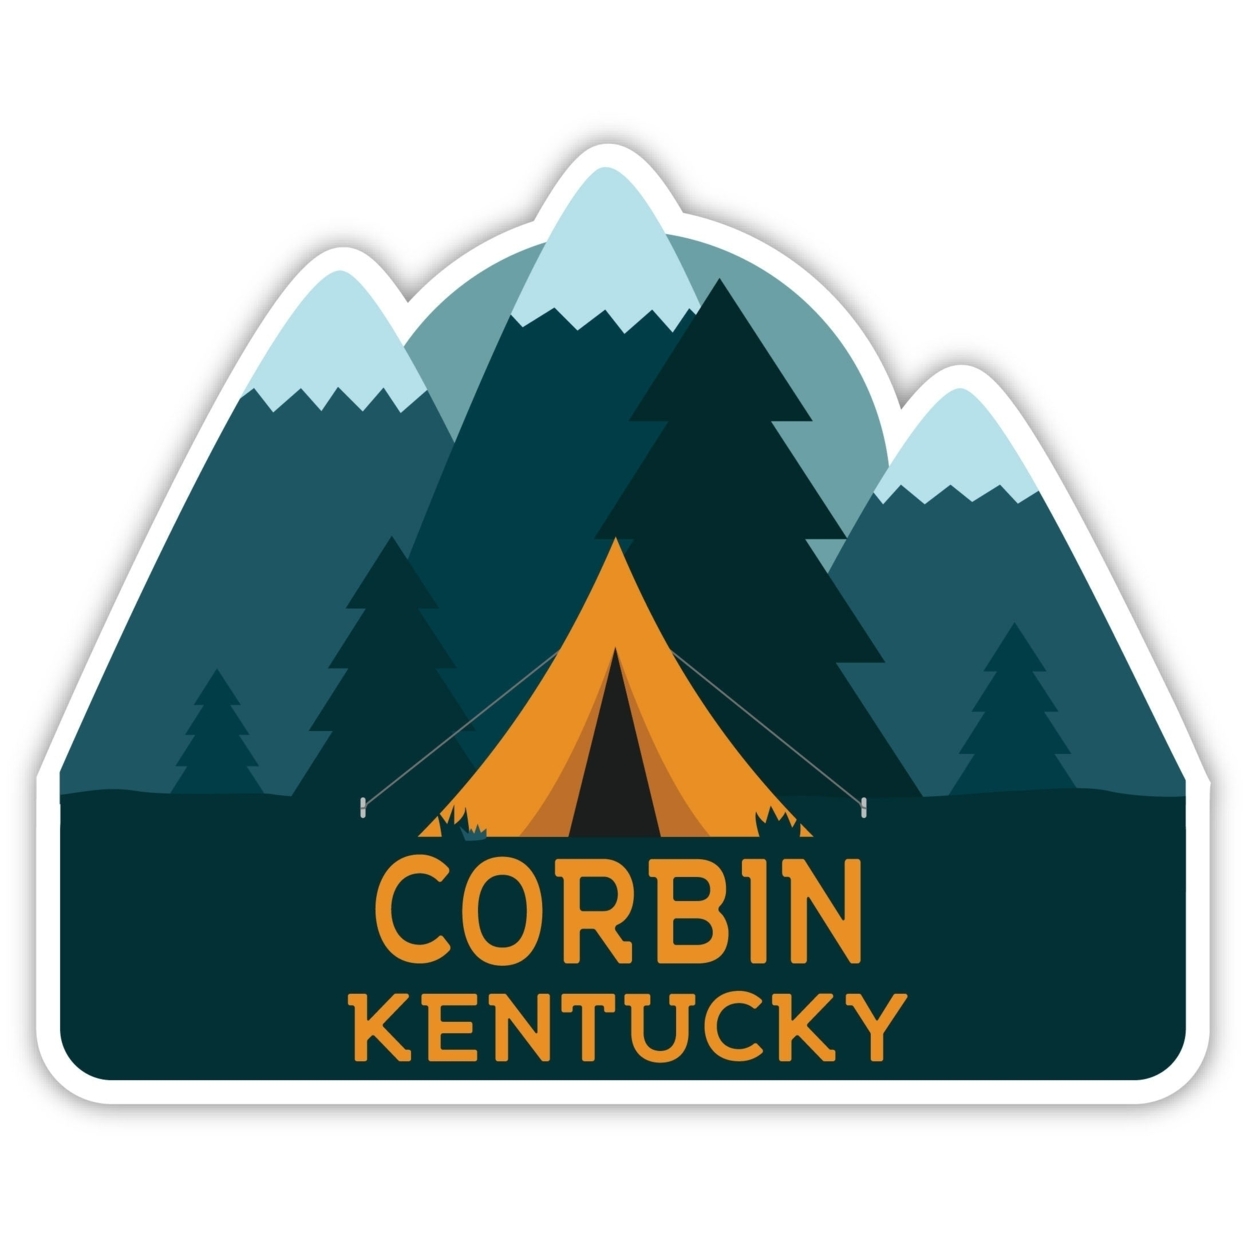 Corbin Kentucky Souvenir Decorative Stickers (Choose Theme And Size) - 4-Pack, 4-Inch, Tent